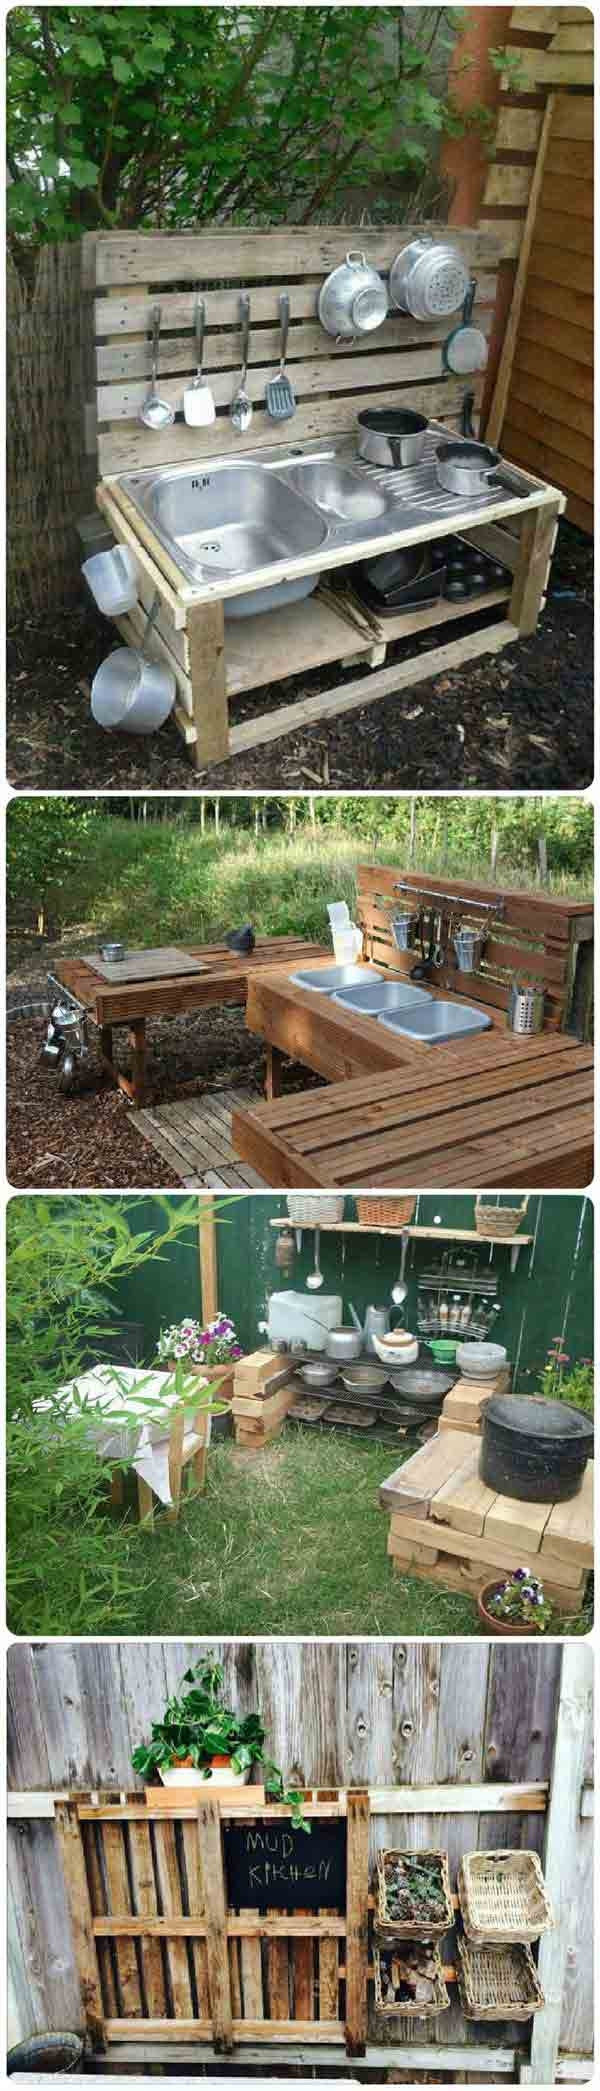 Outdoor DIY Projects
 25 Playful DIY Backyard Projects To Surprise Your Kids